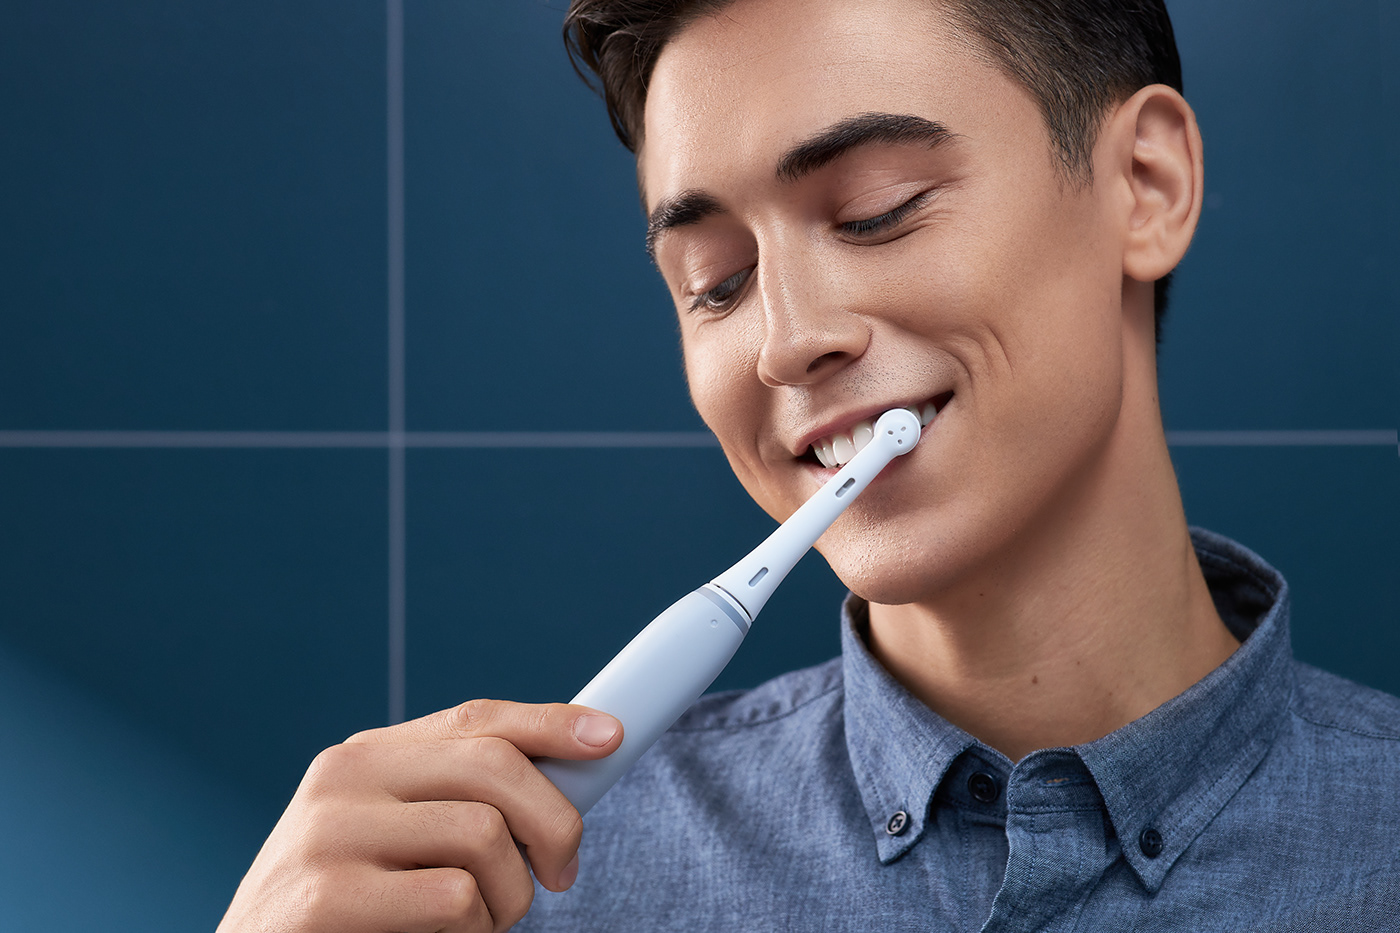 ads Advertising  campaign oral b Photography  product Product Photography toothbrush